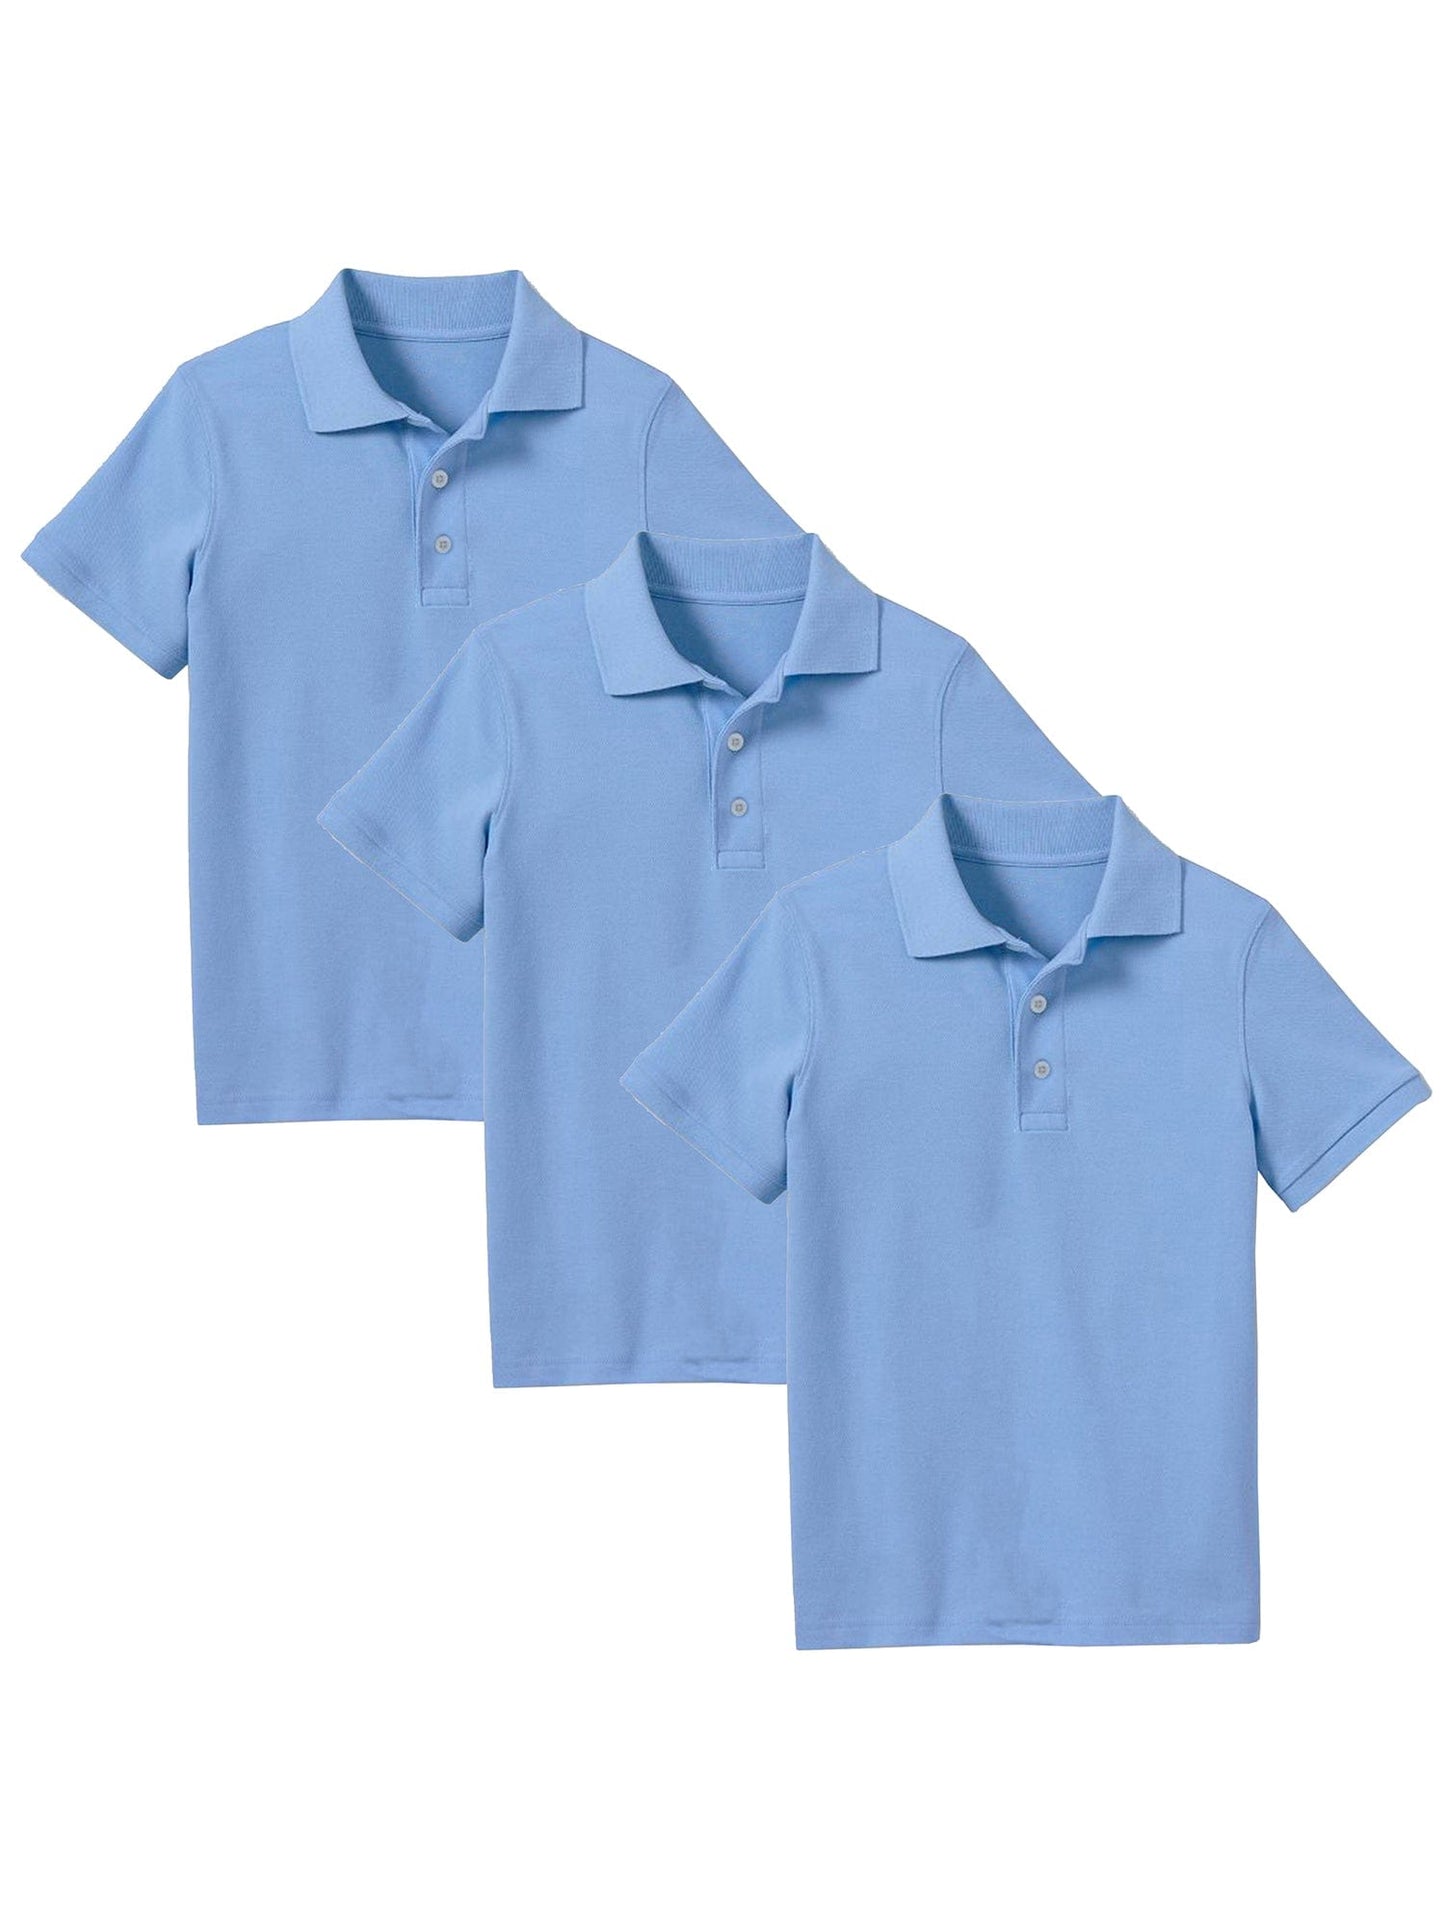 Boy's (3-PACK) Short Sleeve Polo Shirt (Sizes 8-20) - GalaxybyHarvic